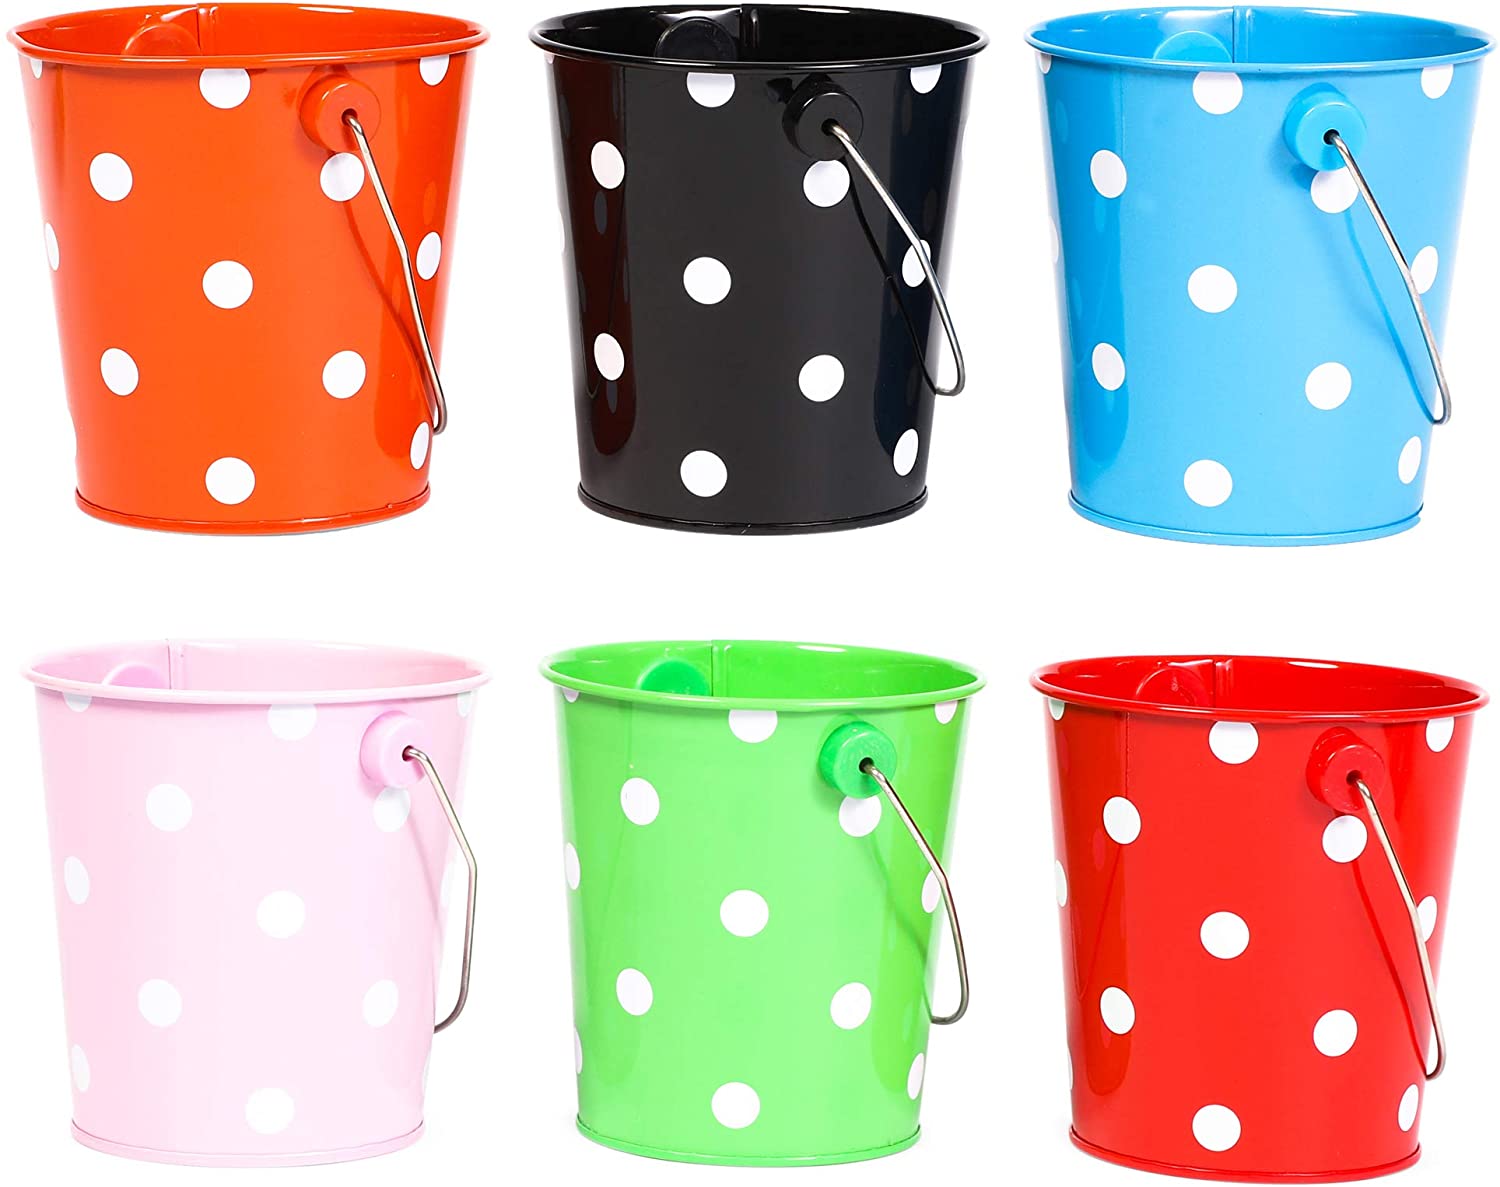 Juvale Mini Metal Buckets with Handles, Polka Dot Pails for Party Favors (6  Pack)